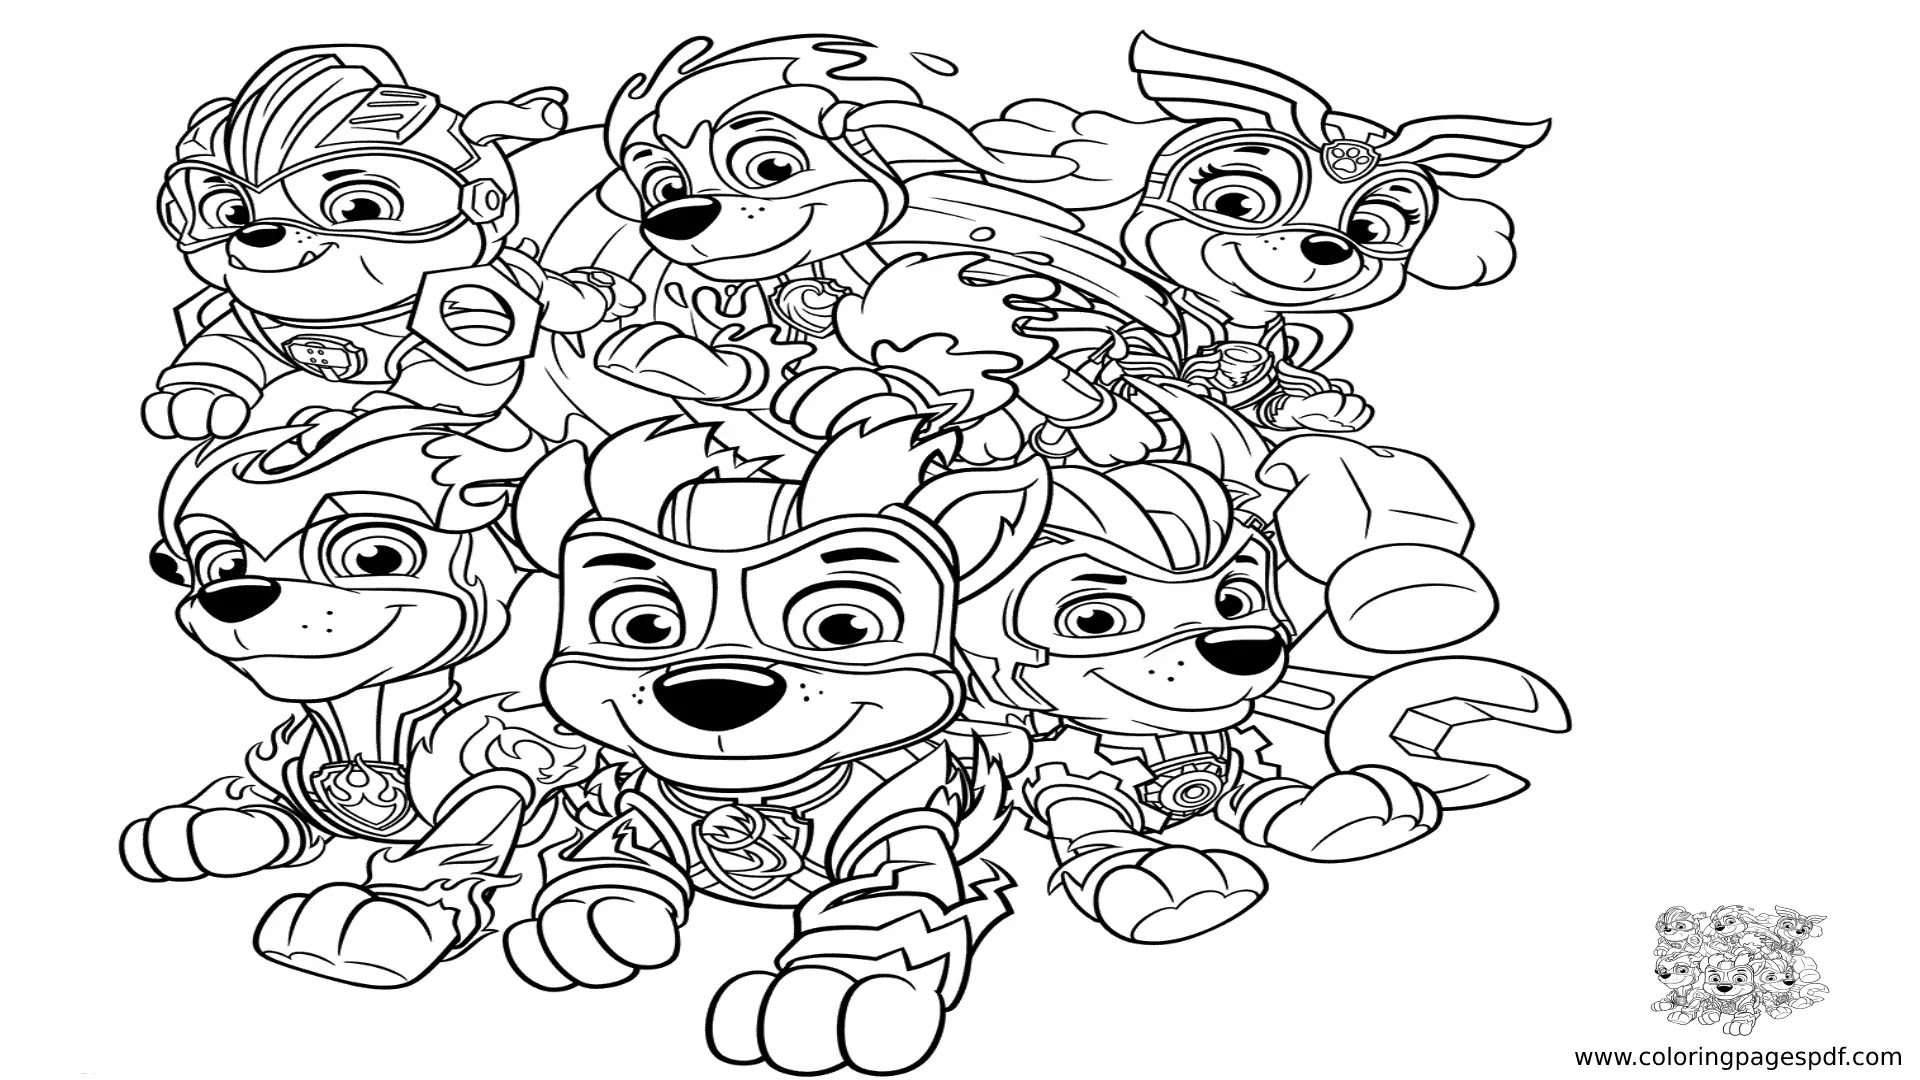 Coloring Pages Of Paw Patrol Dogs